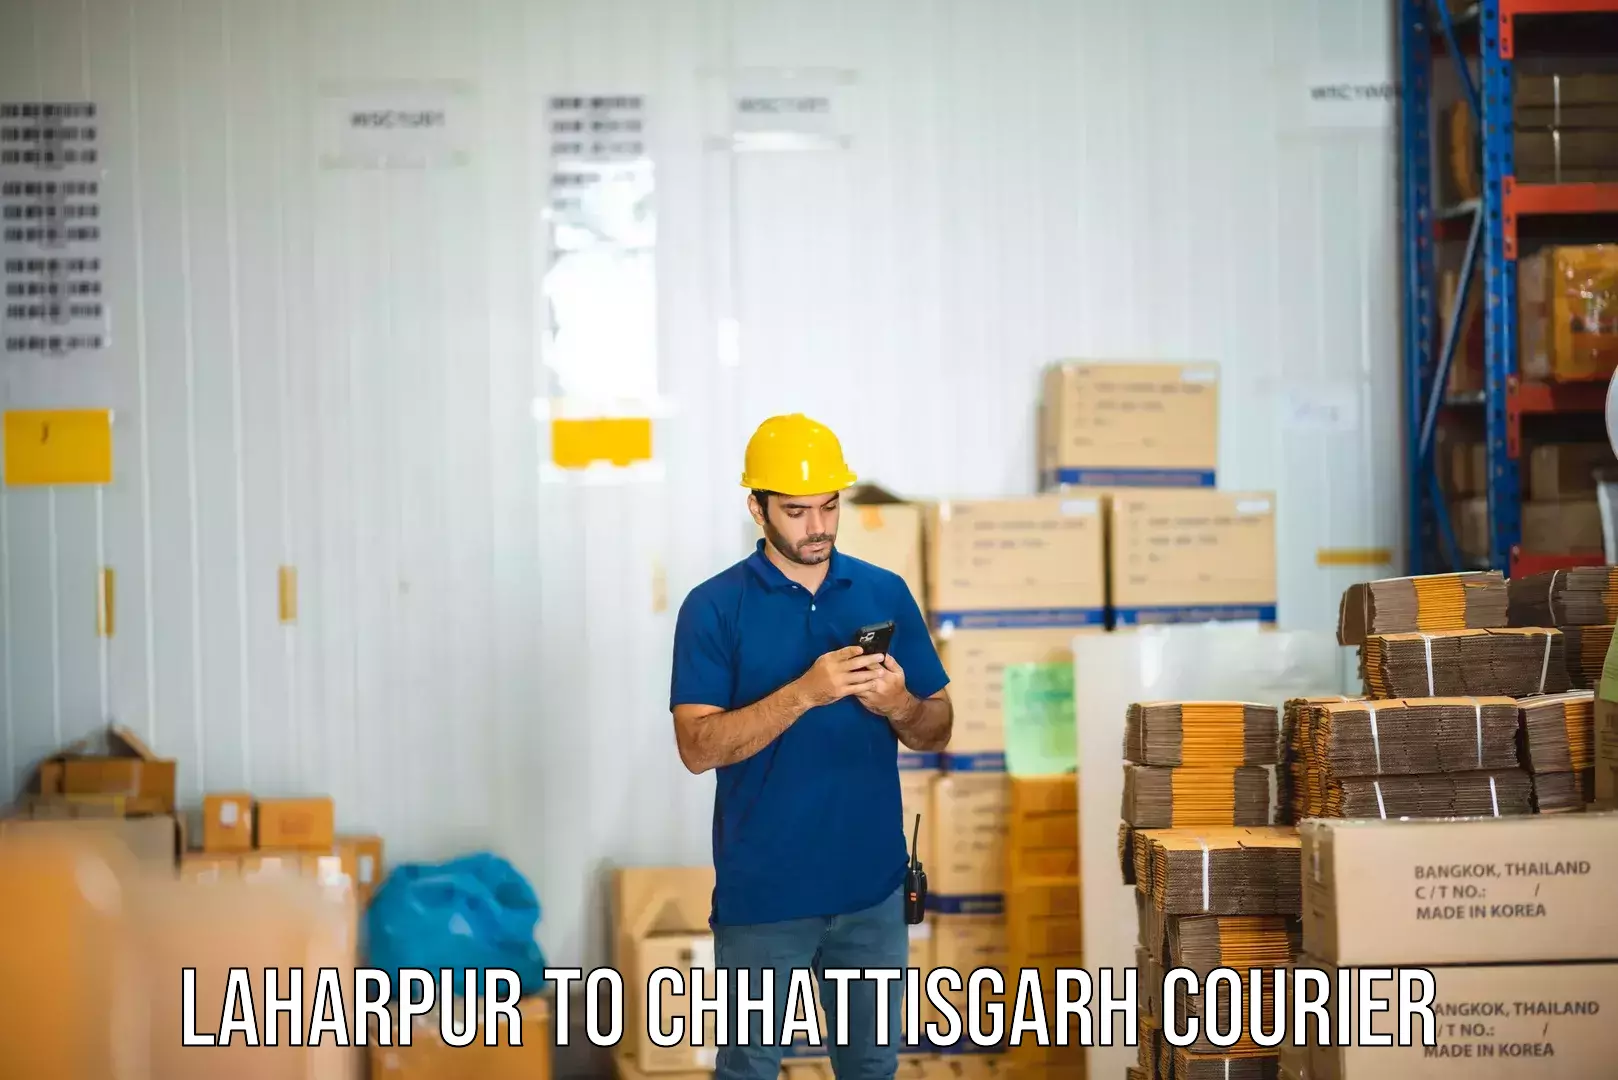 Express mail solutions Laharpur to Raipur